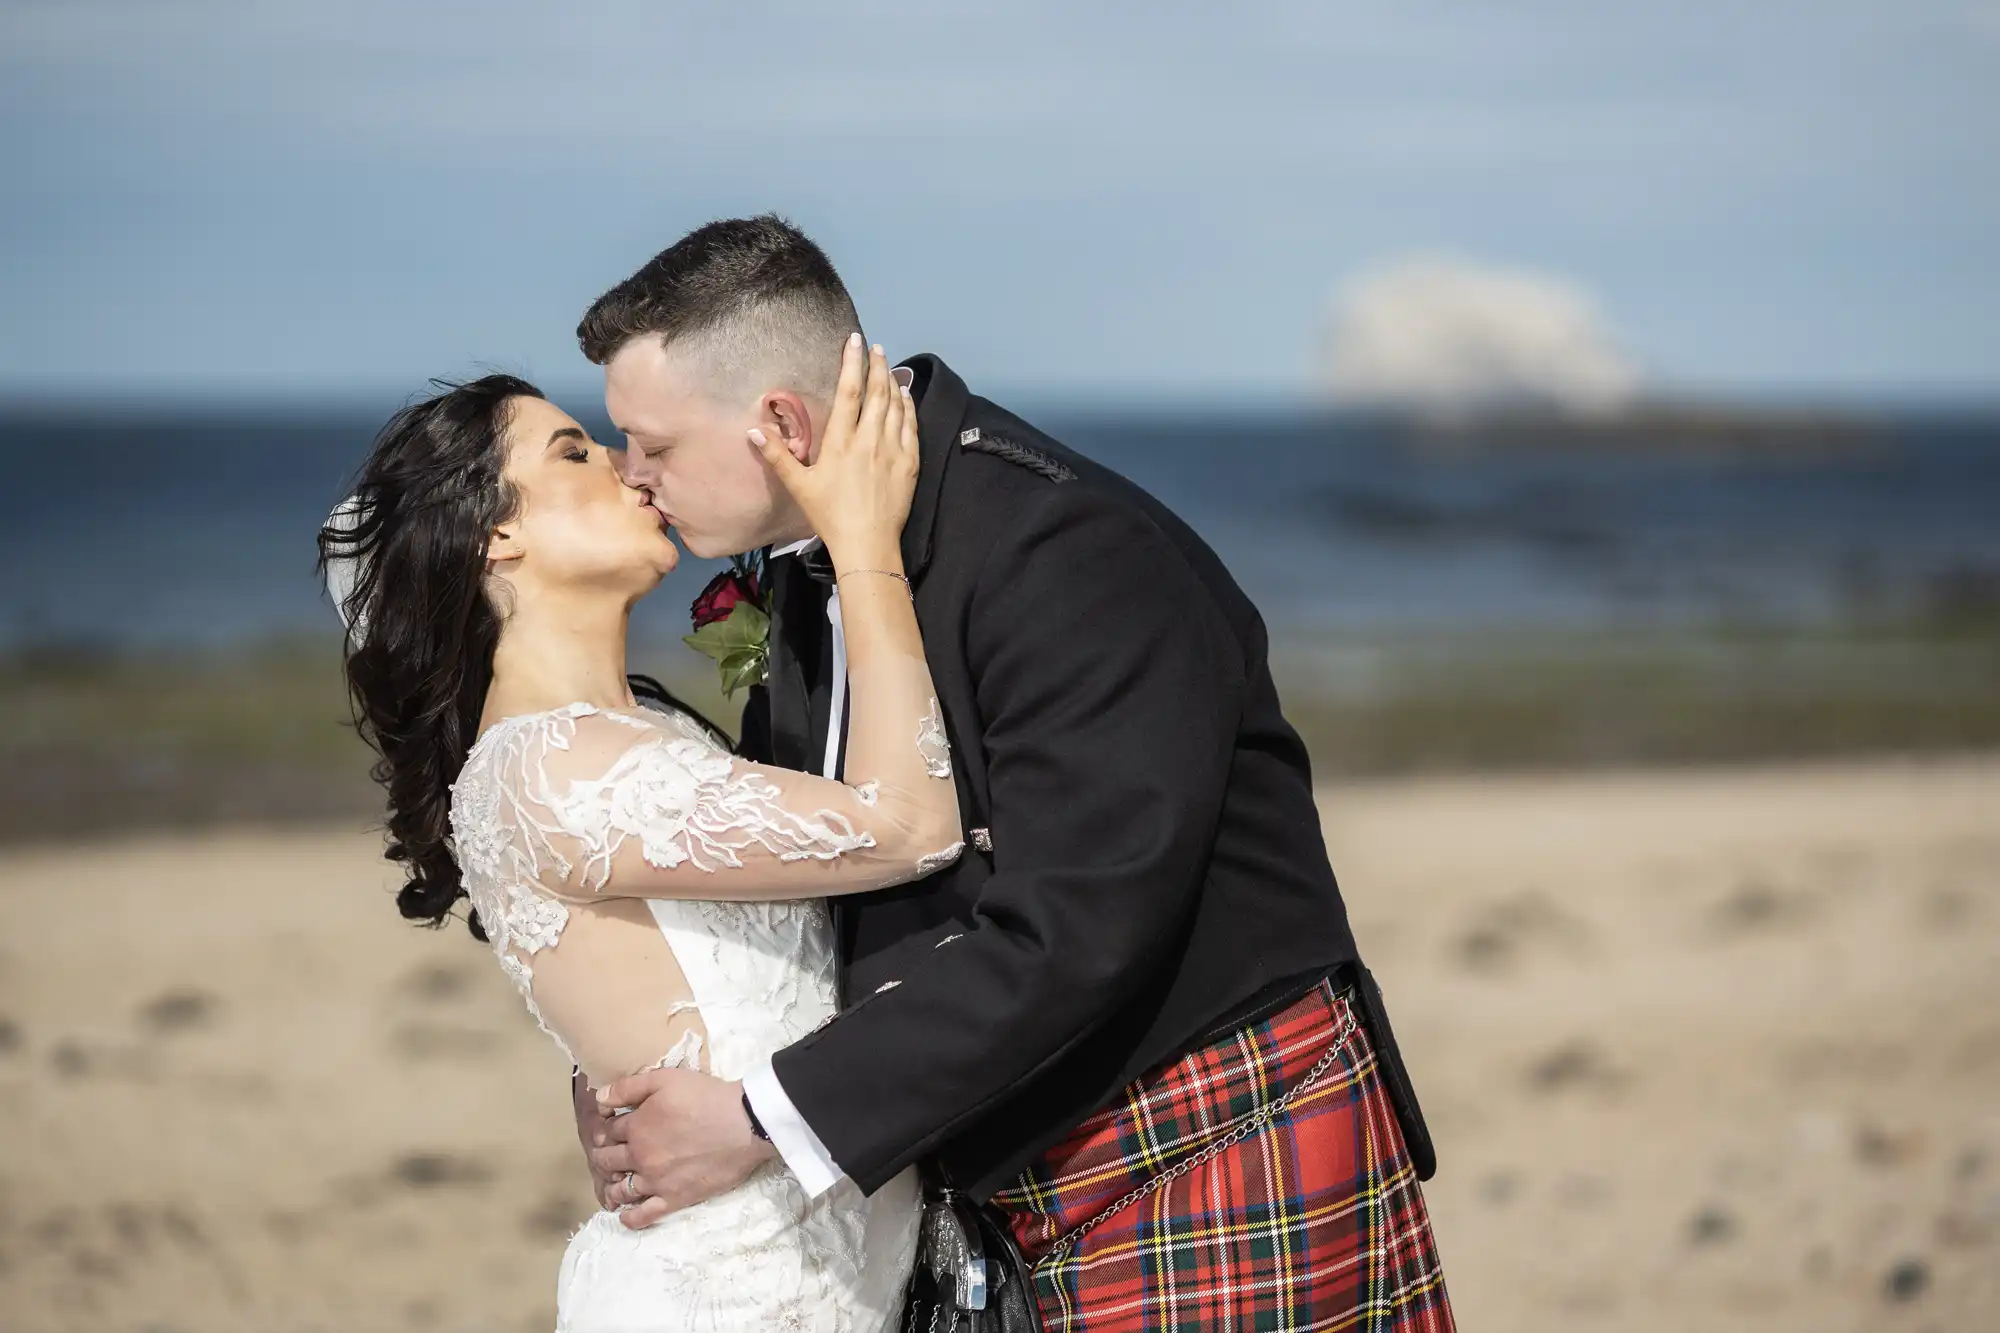 A bride and groom kissing on a beach, with the groom wearing a kilt. A distant cloud drifts over the sea in the background.